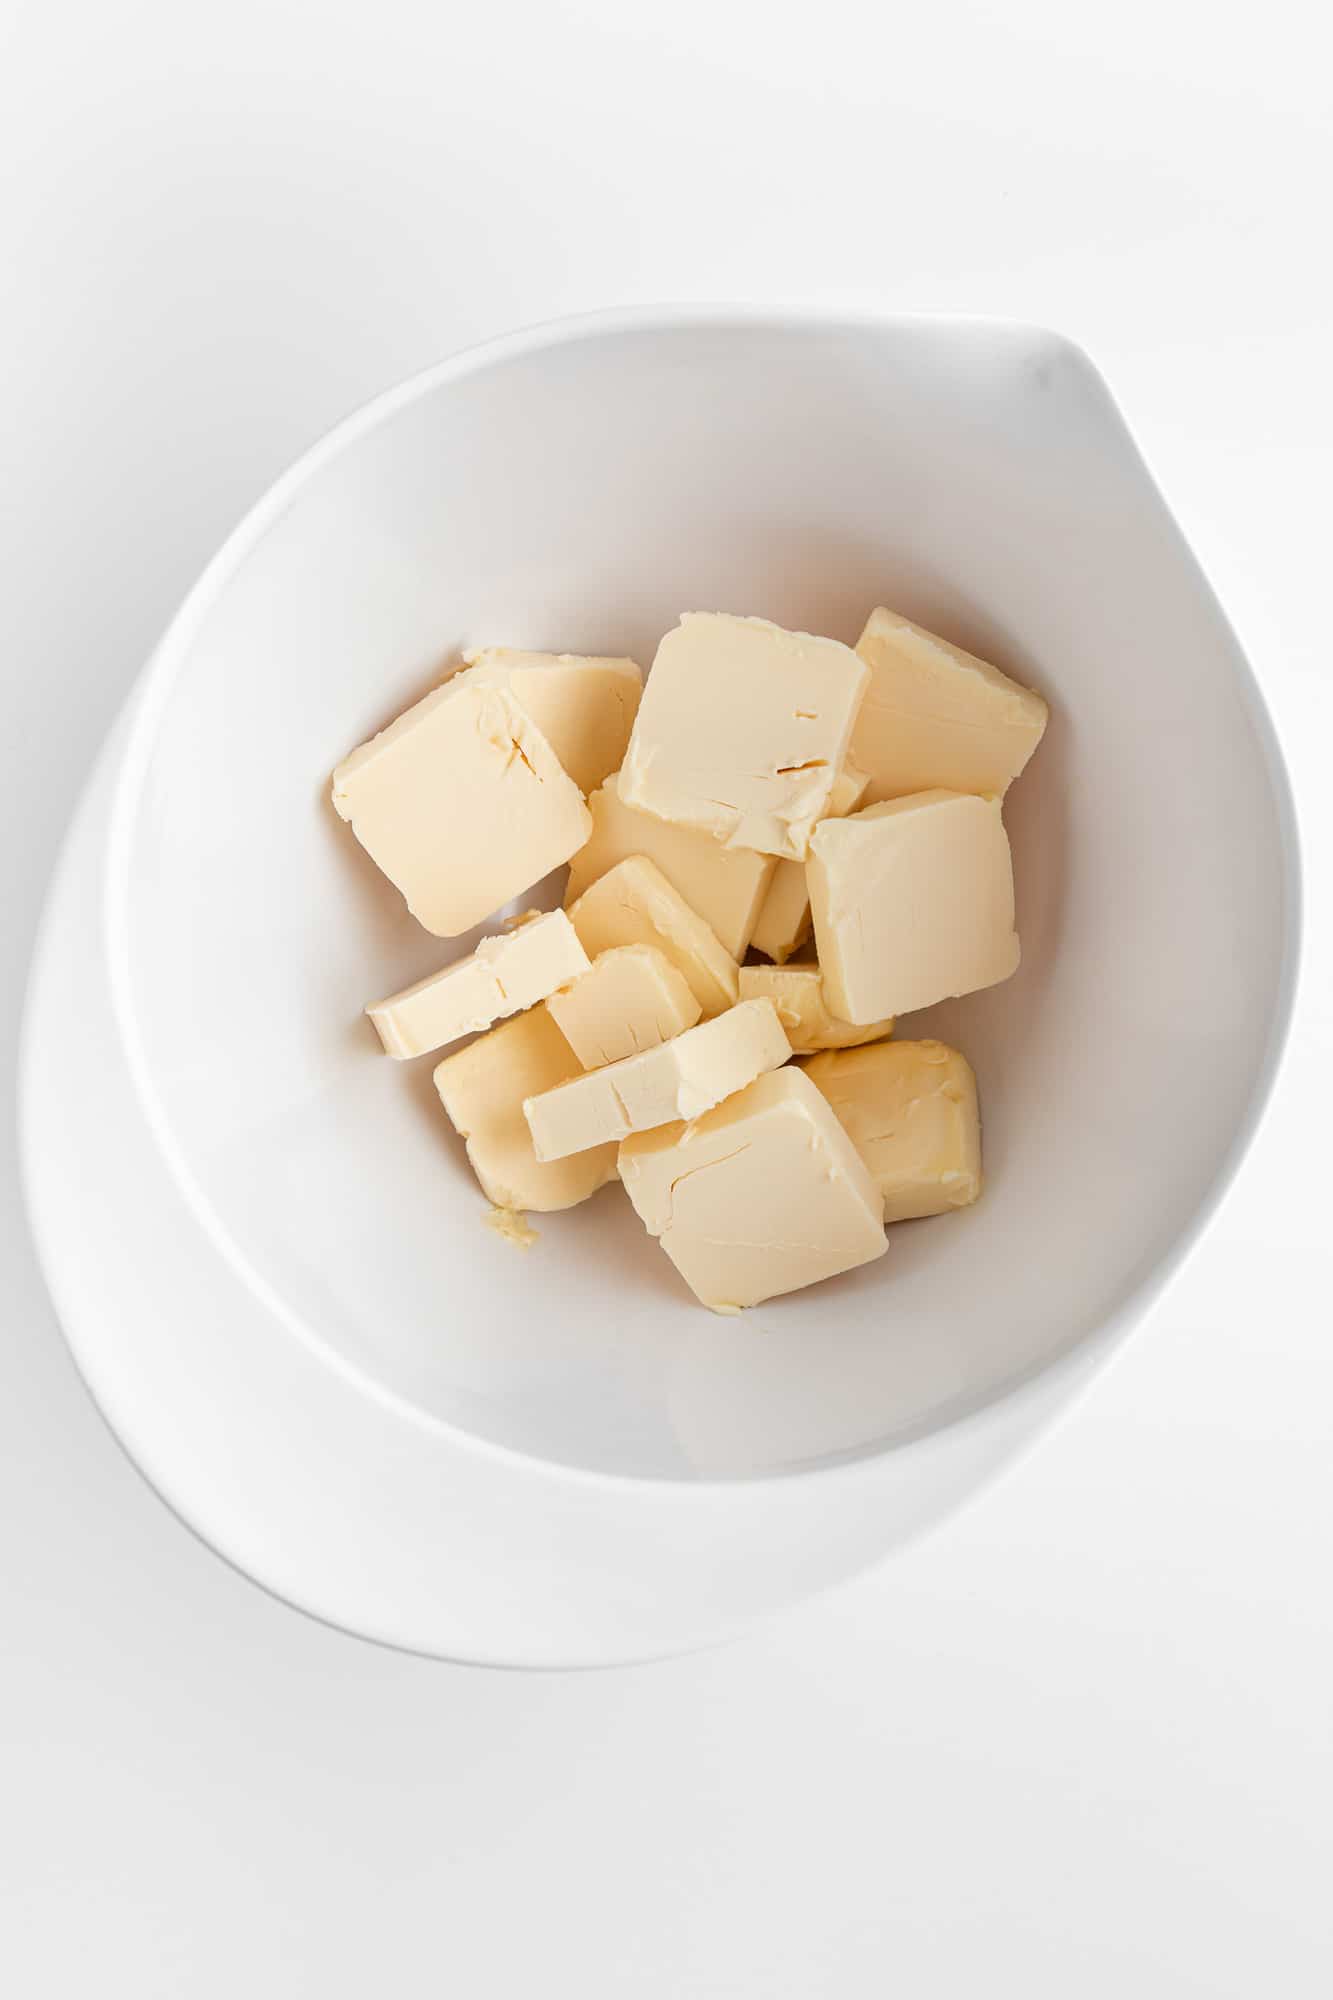 cubed butter in a large white bowl